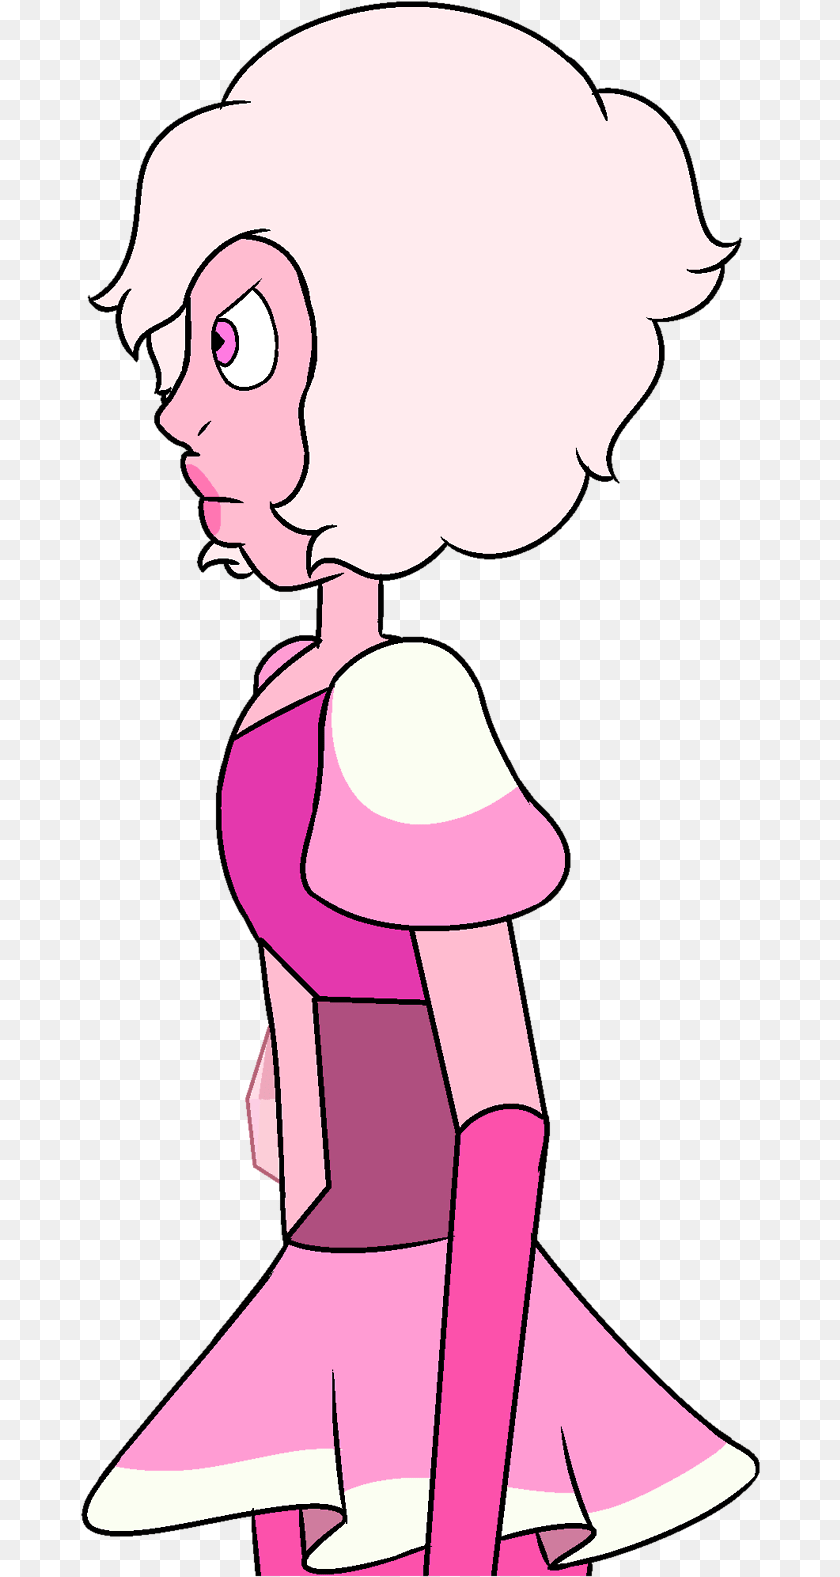 680x1577 Additional Pink Diamond Drawings I Might Do More Cartoon, Publication, Book, Comics, Person Transparent PNG